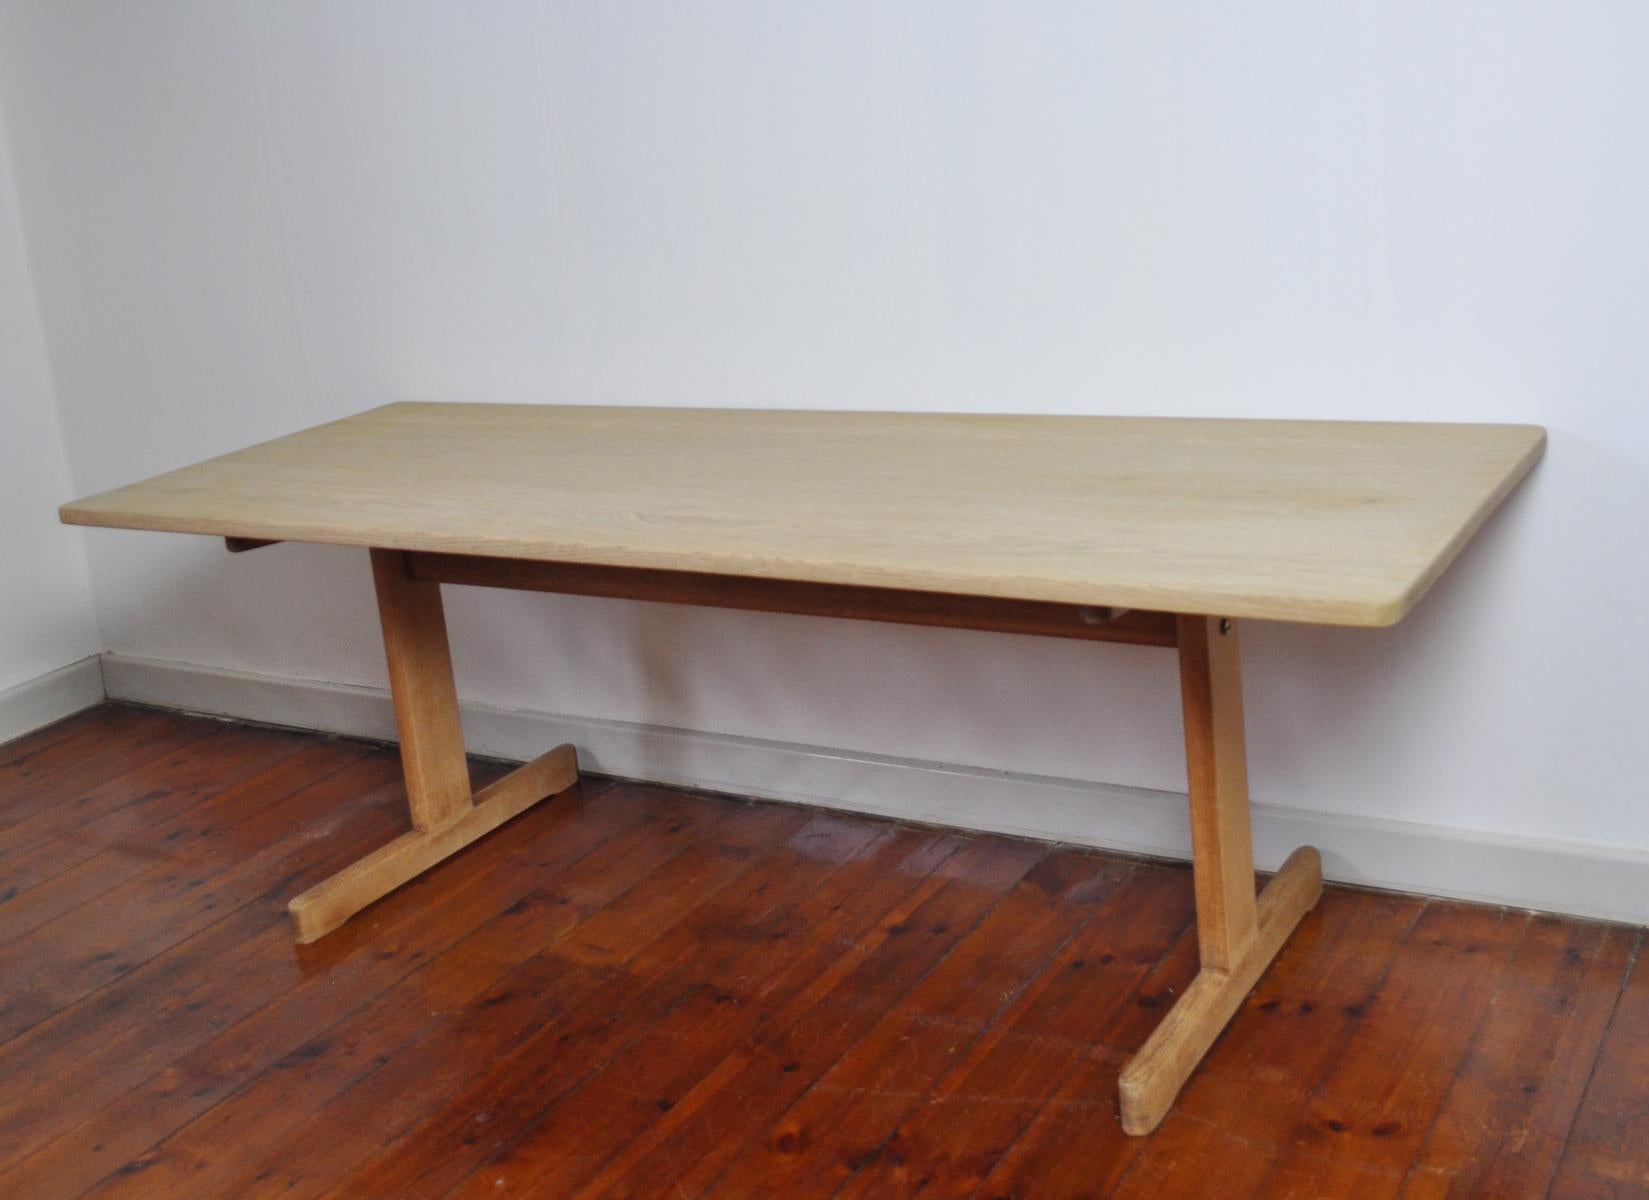 Danish Børge Mogensen Coffee Table in Solid Oak for C.M. Madsens Fabrik, 1960s For Sale